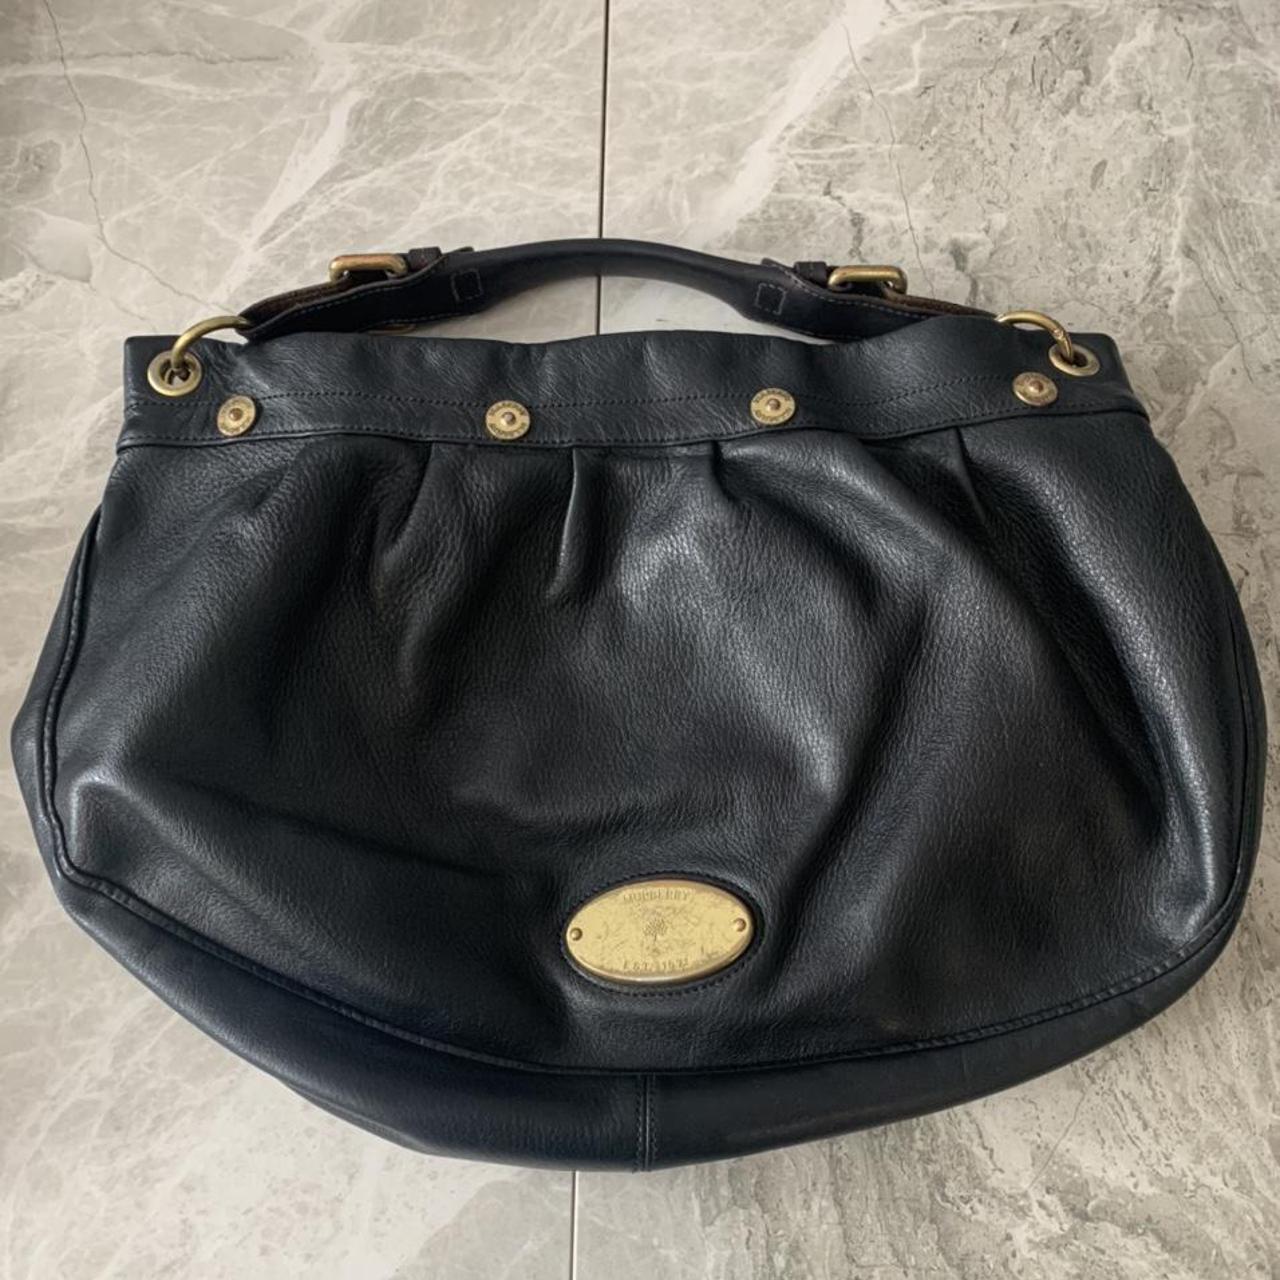 Authentic Mulberry Mitzy East West Hobo Cross Body... - Depop